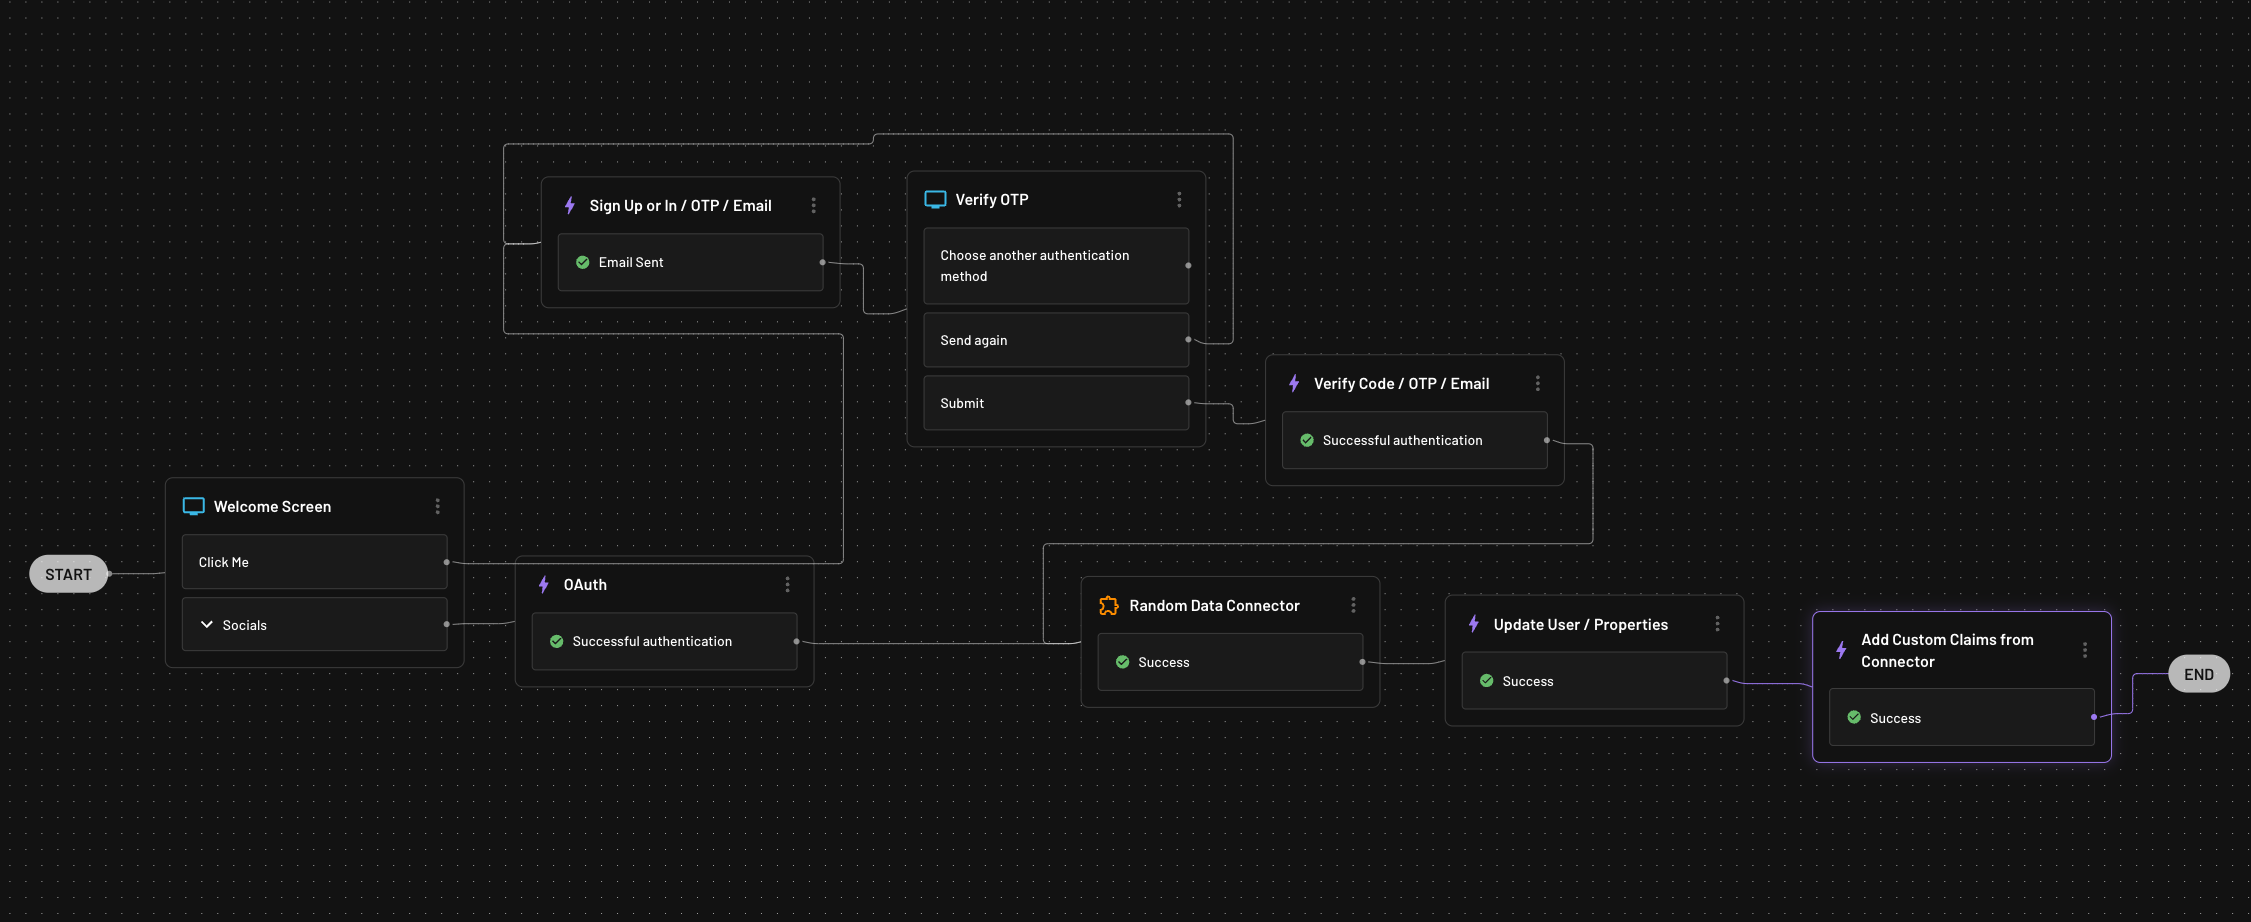 Descope custom claims action shown within flows.